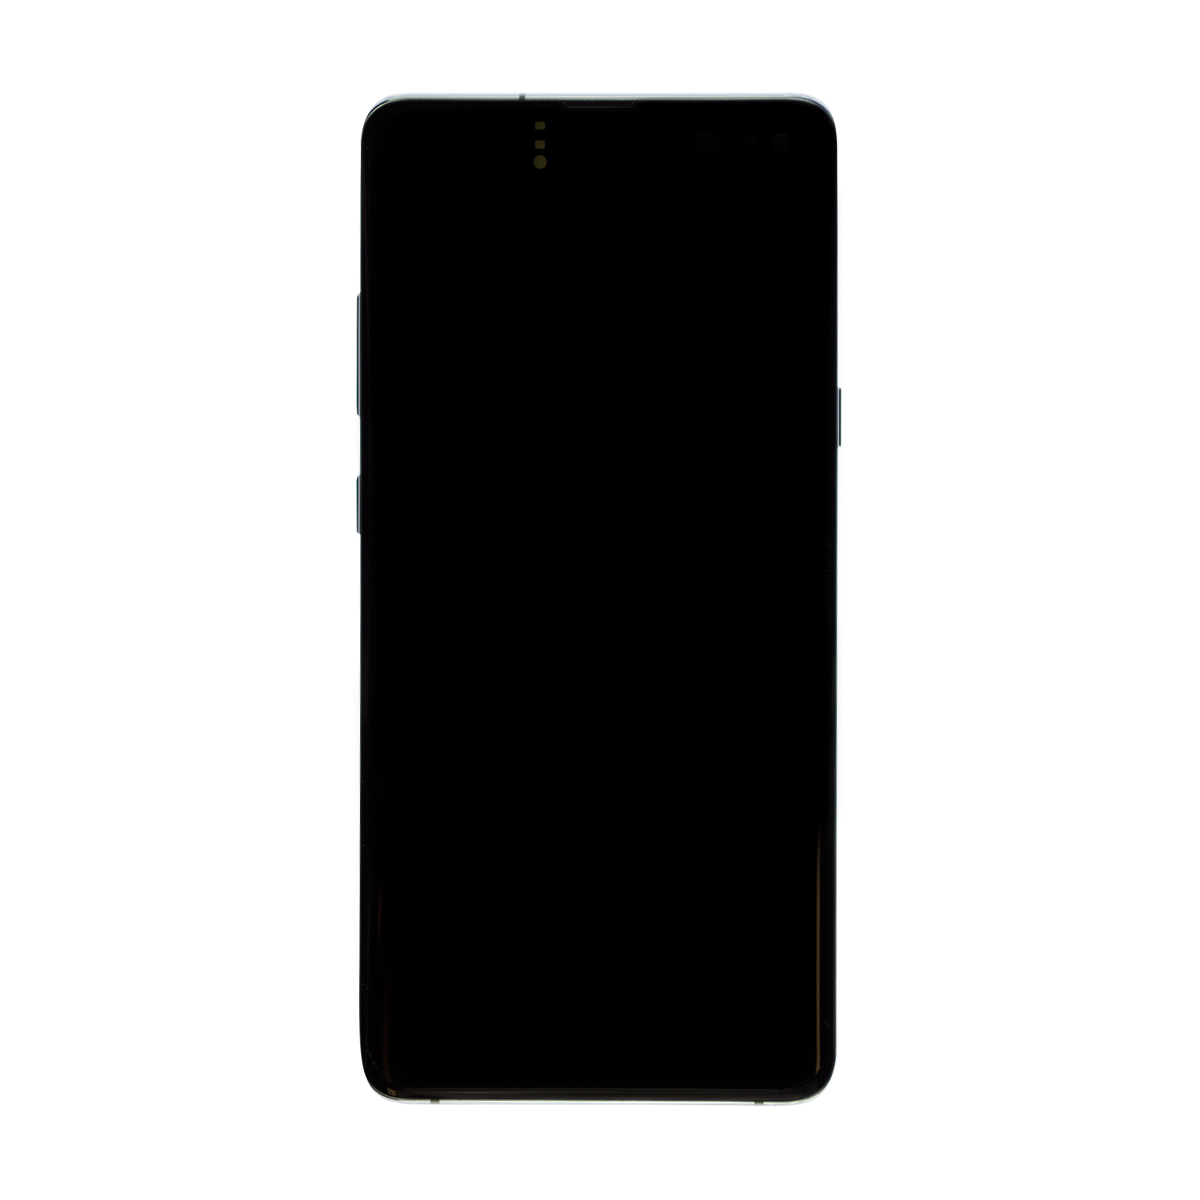 Samsung Galaxy S10 5G (G977) OLED and Touch Screen Replacement